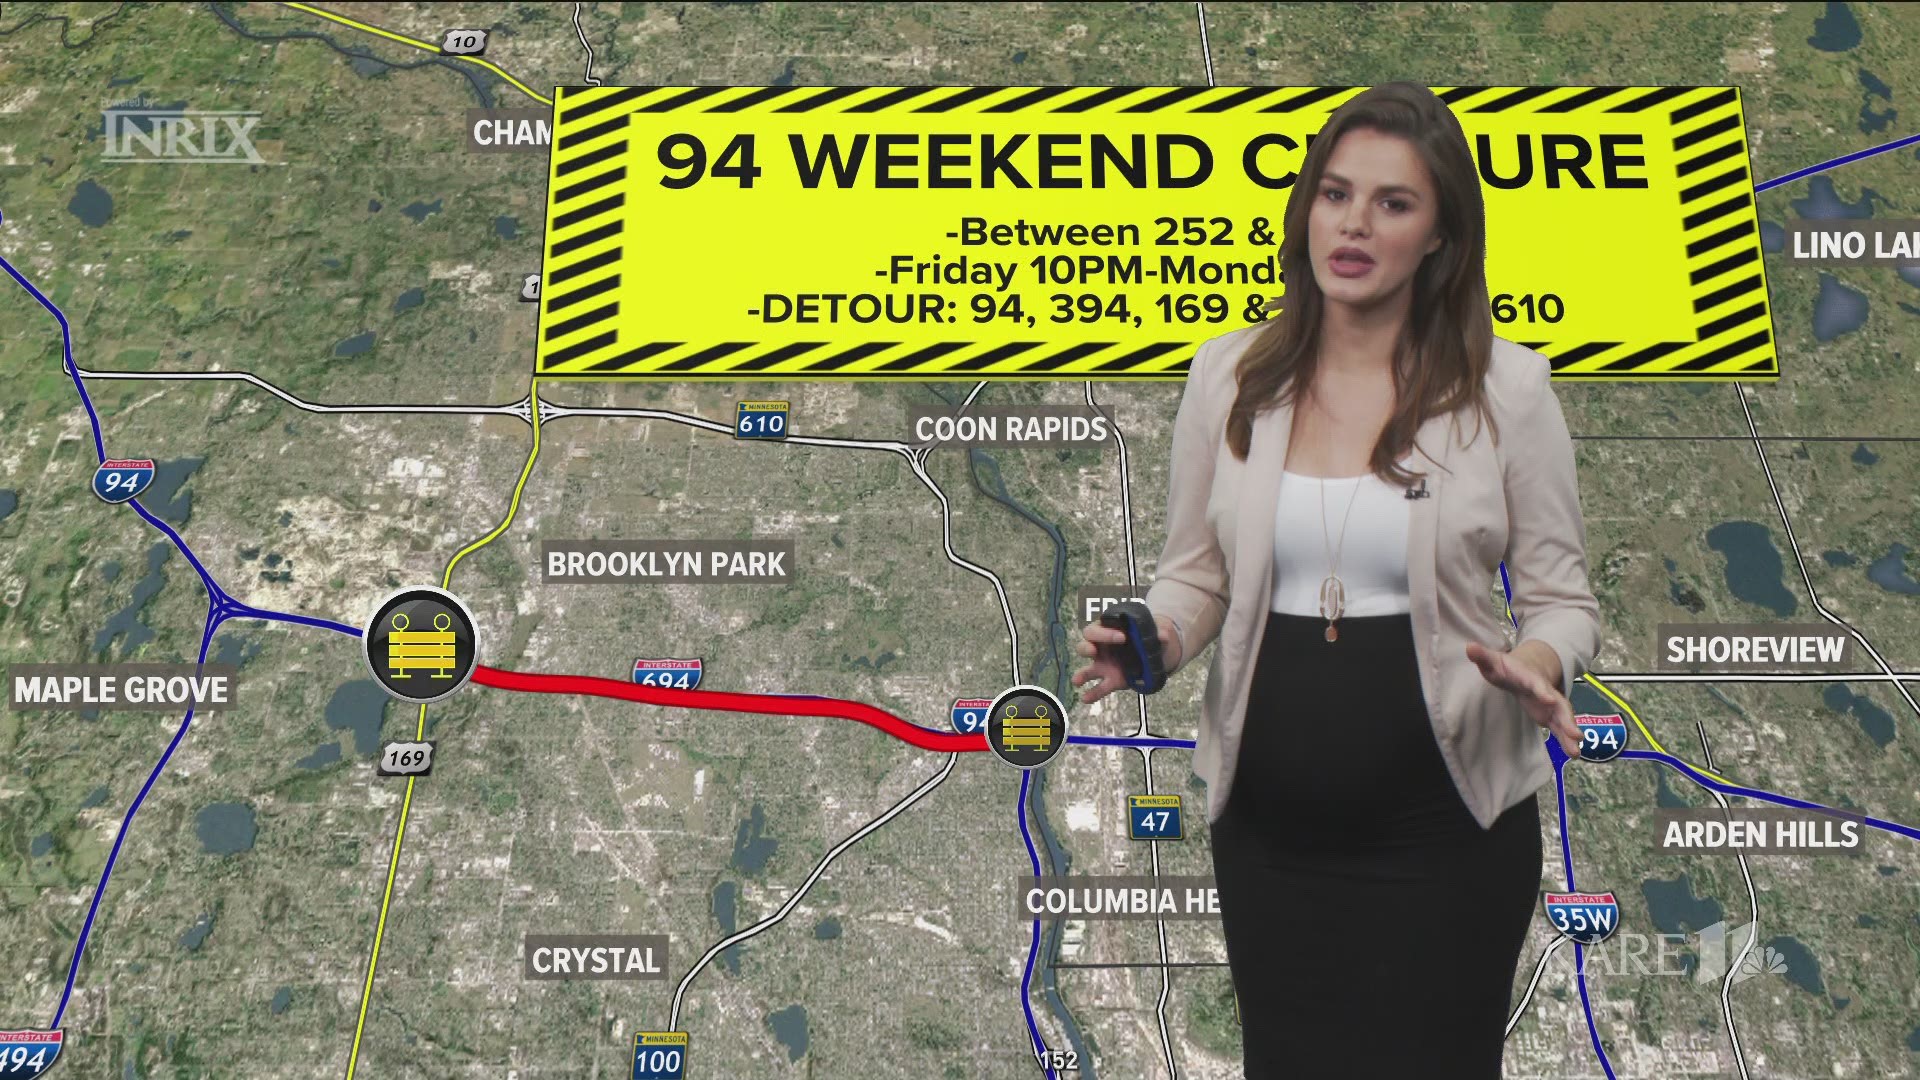 At least four major road projects will close stretches of heavily-used metro interstates and highways this weekend. Here is a guide to help you cope.